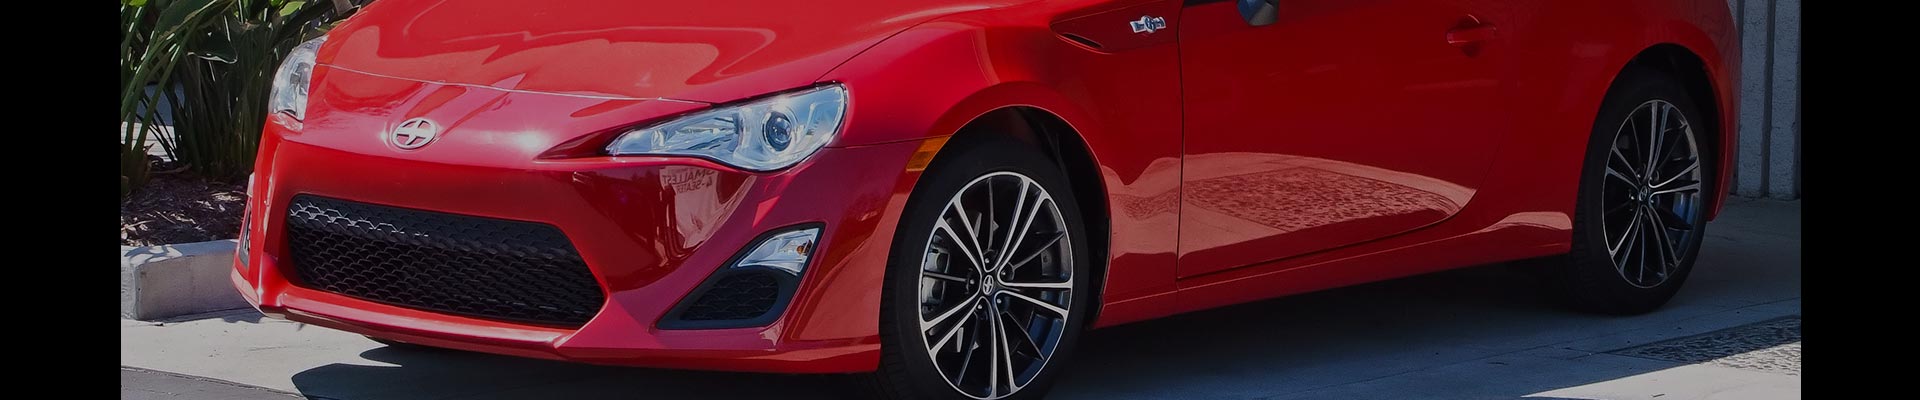 Shop Replacement and OEM 2016 Scion FR-S Parts with Discounted Price on the Net